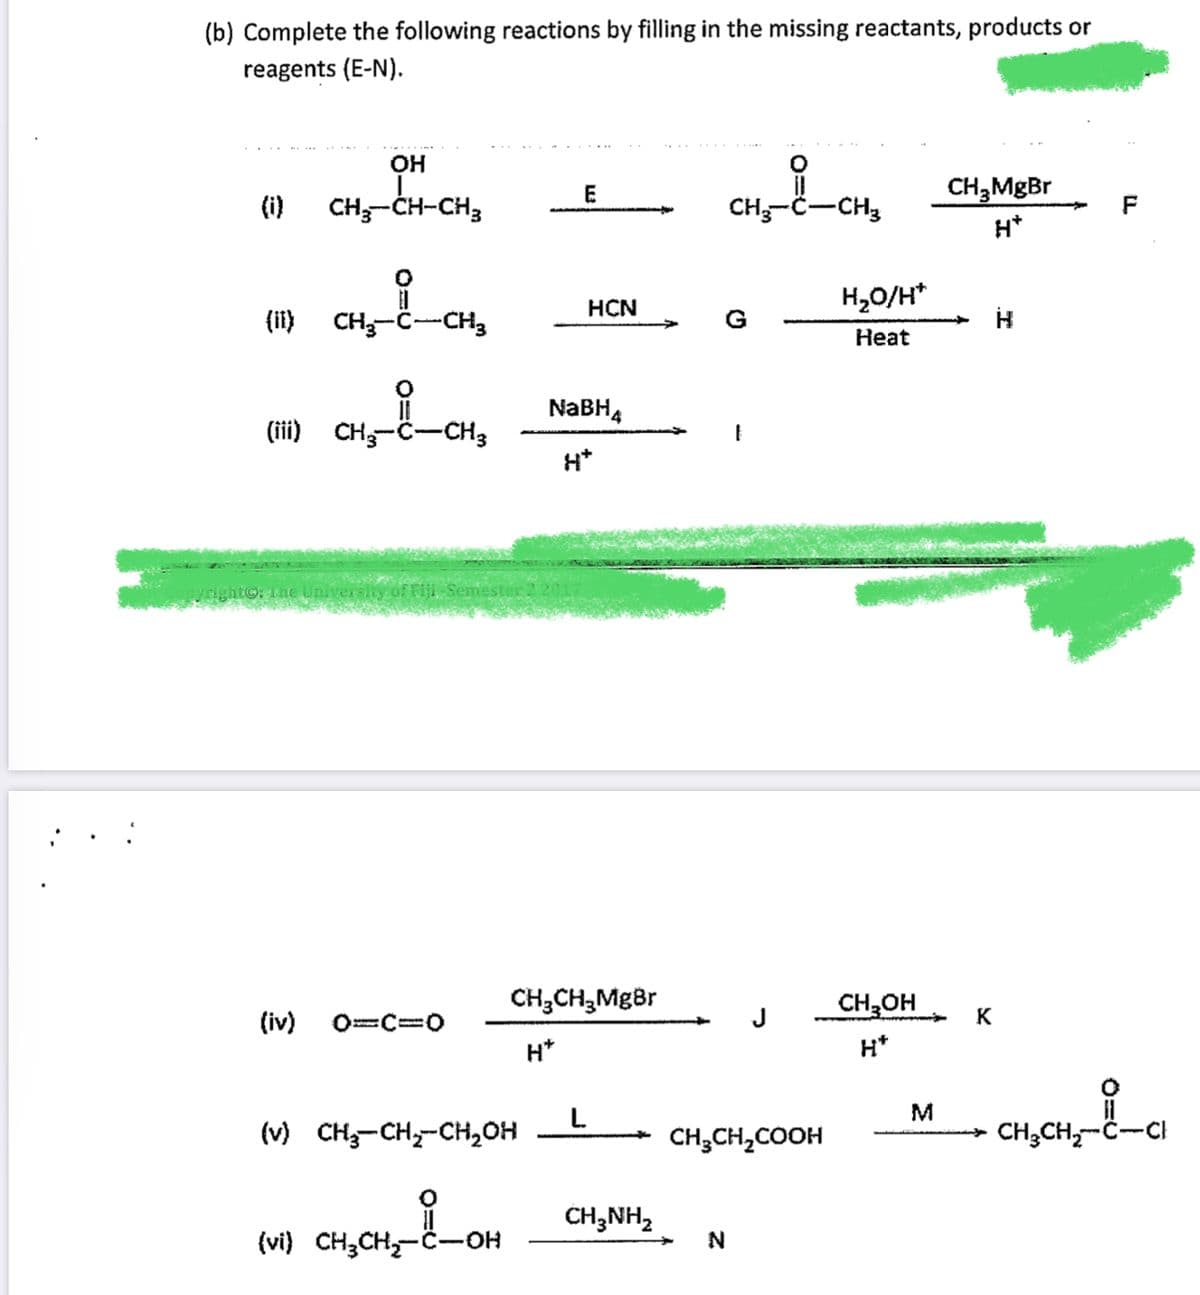 (b) Complete the following reactions by filling in the missing reactants, products or
reagents (E-N).
OH
E
(i)
CH-CH-CH3
CH-Č-CH3
H*
H,O/H*
НCN
(ii) CH-C
-CH3
G
Heat
NABH4
(iii) CH-C-CH3
H*
The Universiy
mester
CH;CH,MgBr
CH,OH
(iv)
J
K
%3D
H*
H*
L.
(v) CH-CH,-CH,OH
CH;CH,COOH
CH;CH,-Ĉ--CI
CH,NH,
(vi) CH3CH,-Č
